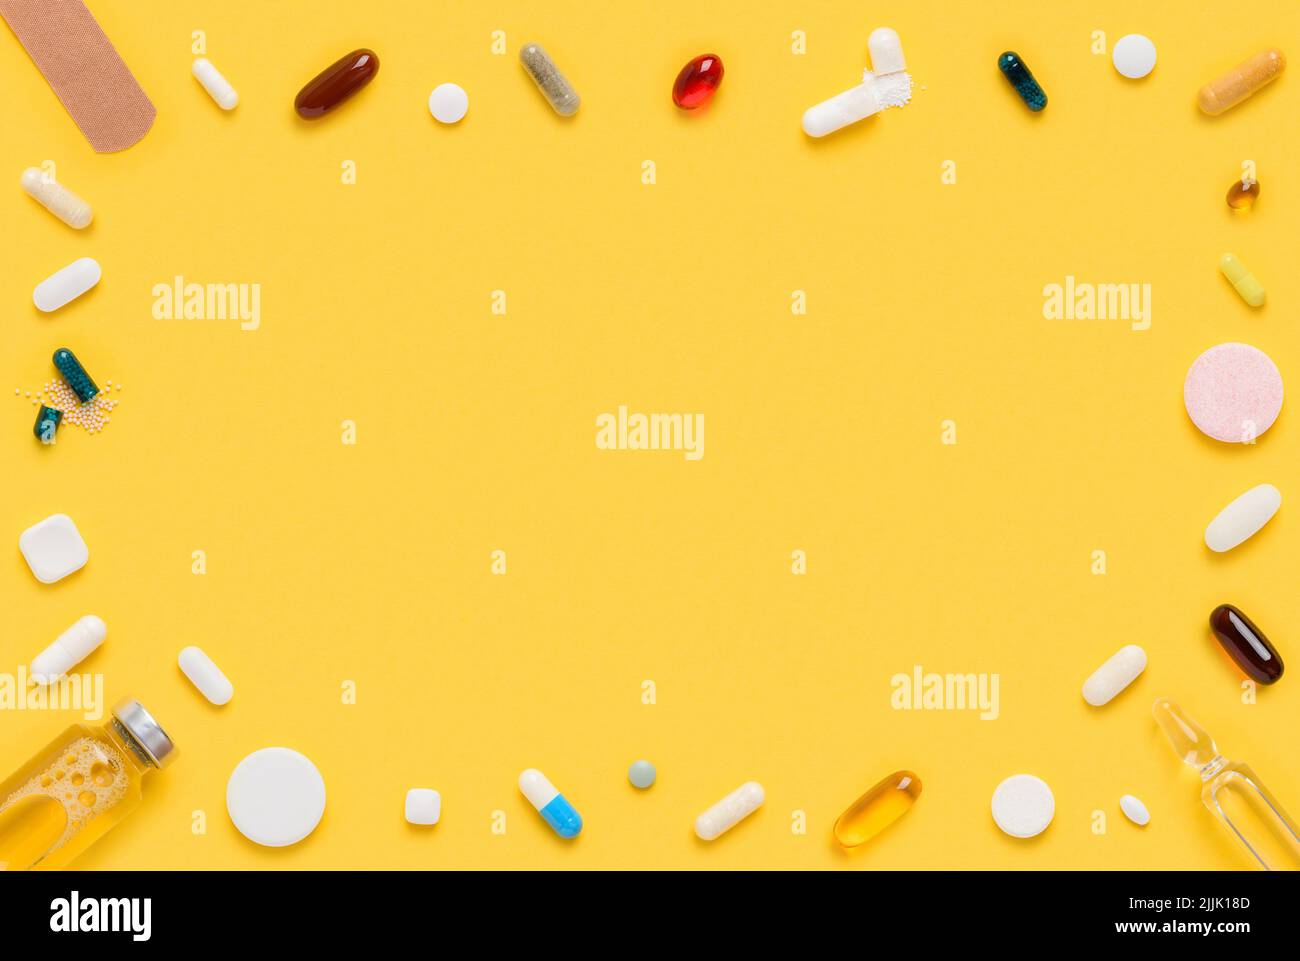 Medical drugs tablets and pills assortment frame border on yellow background top view flat lay Stock Photo